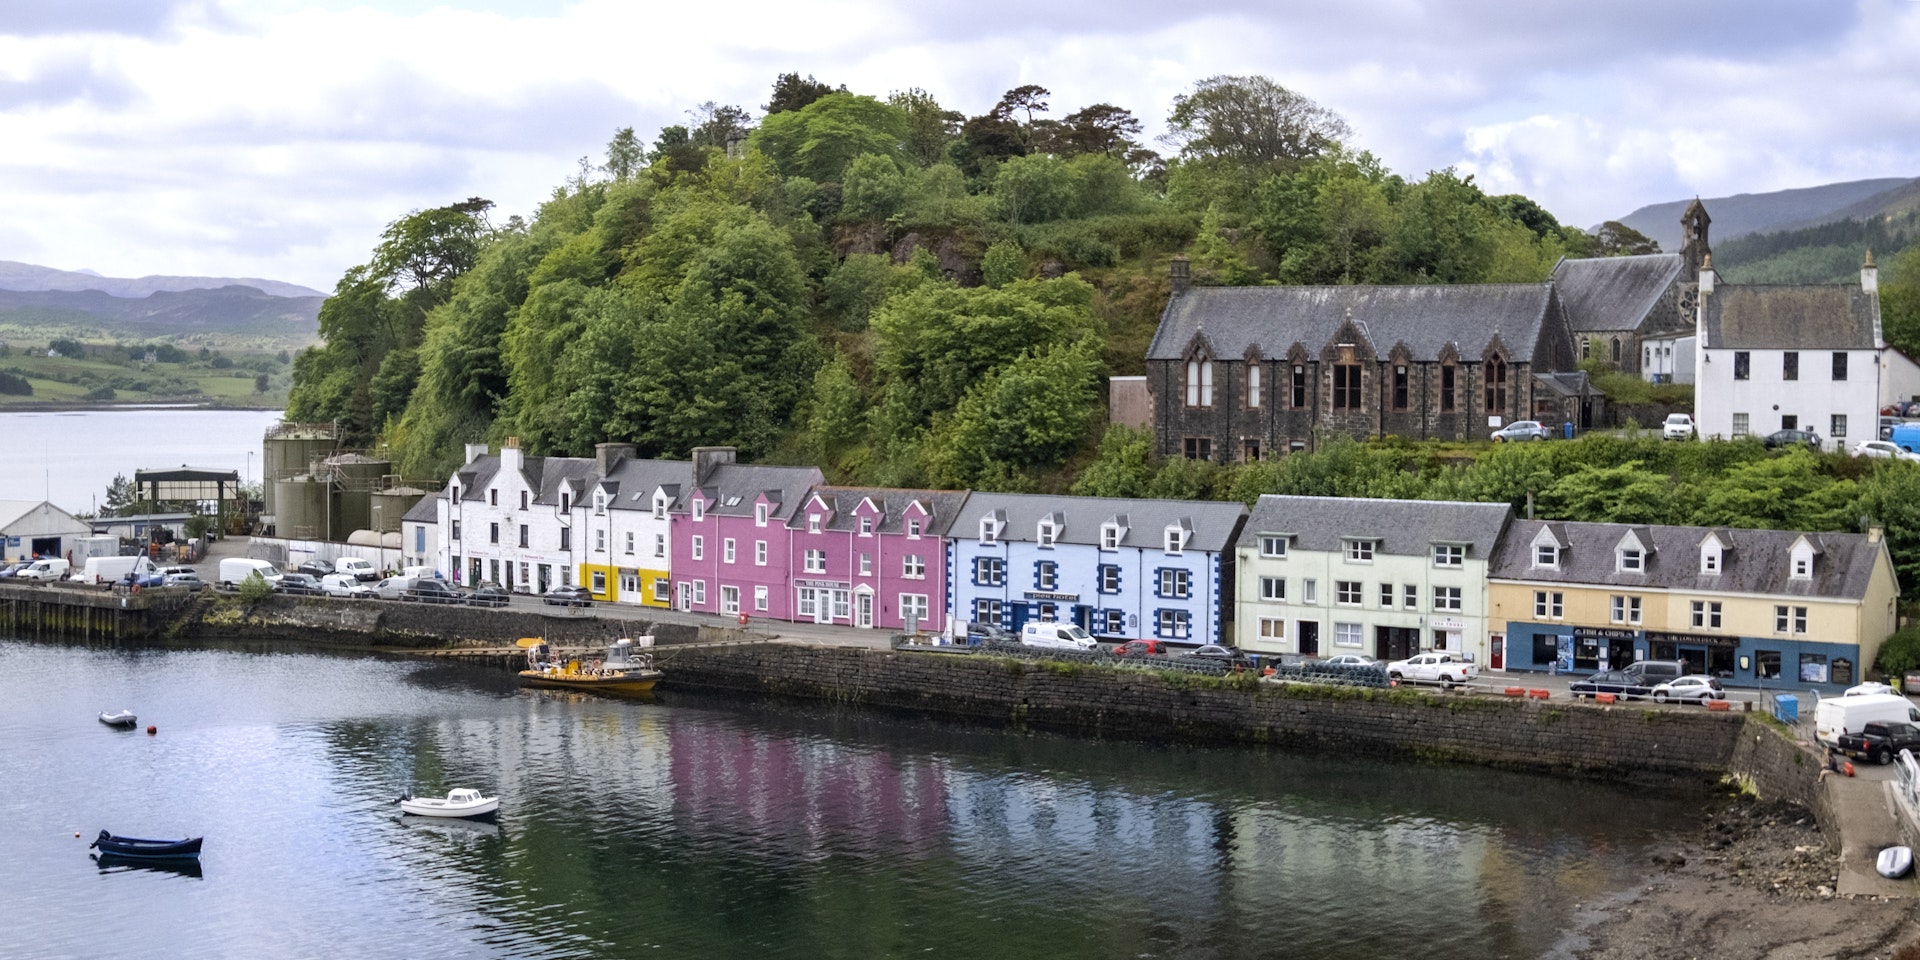 Scenic view looking out over the colorful village of Portree, capital of the Isle of Skye on a beautiful spring day.